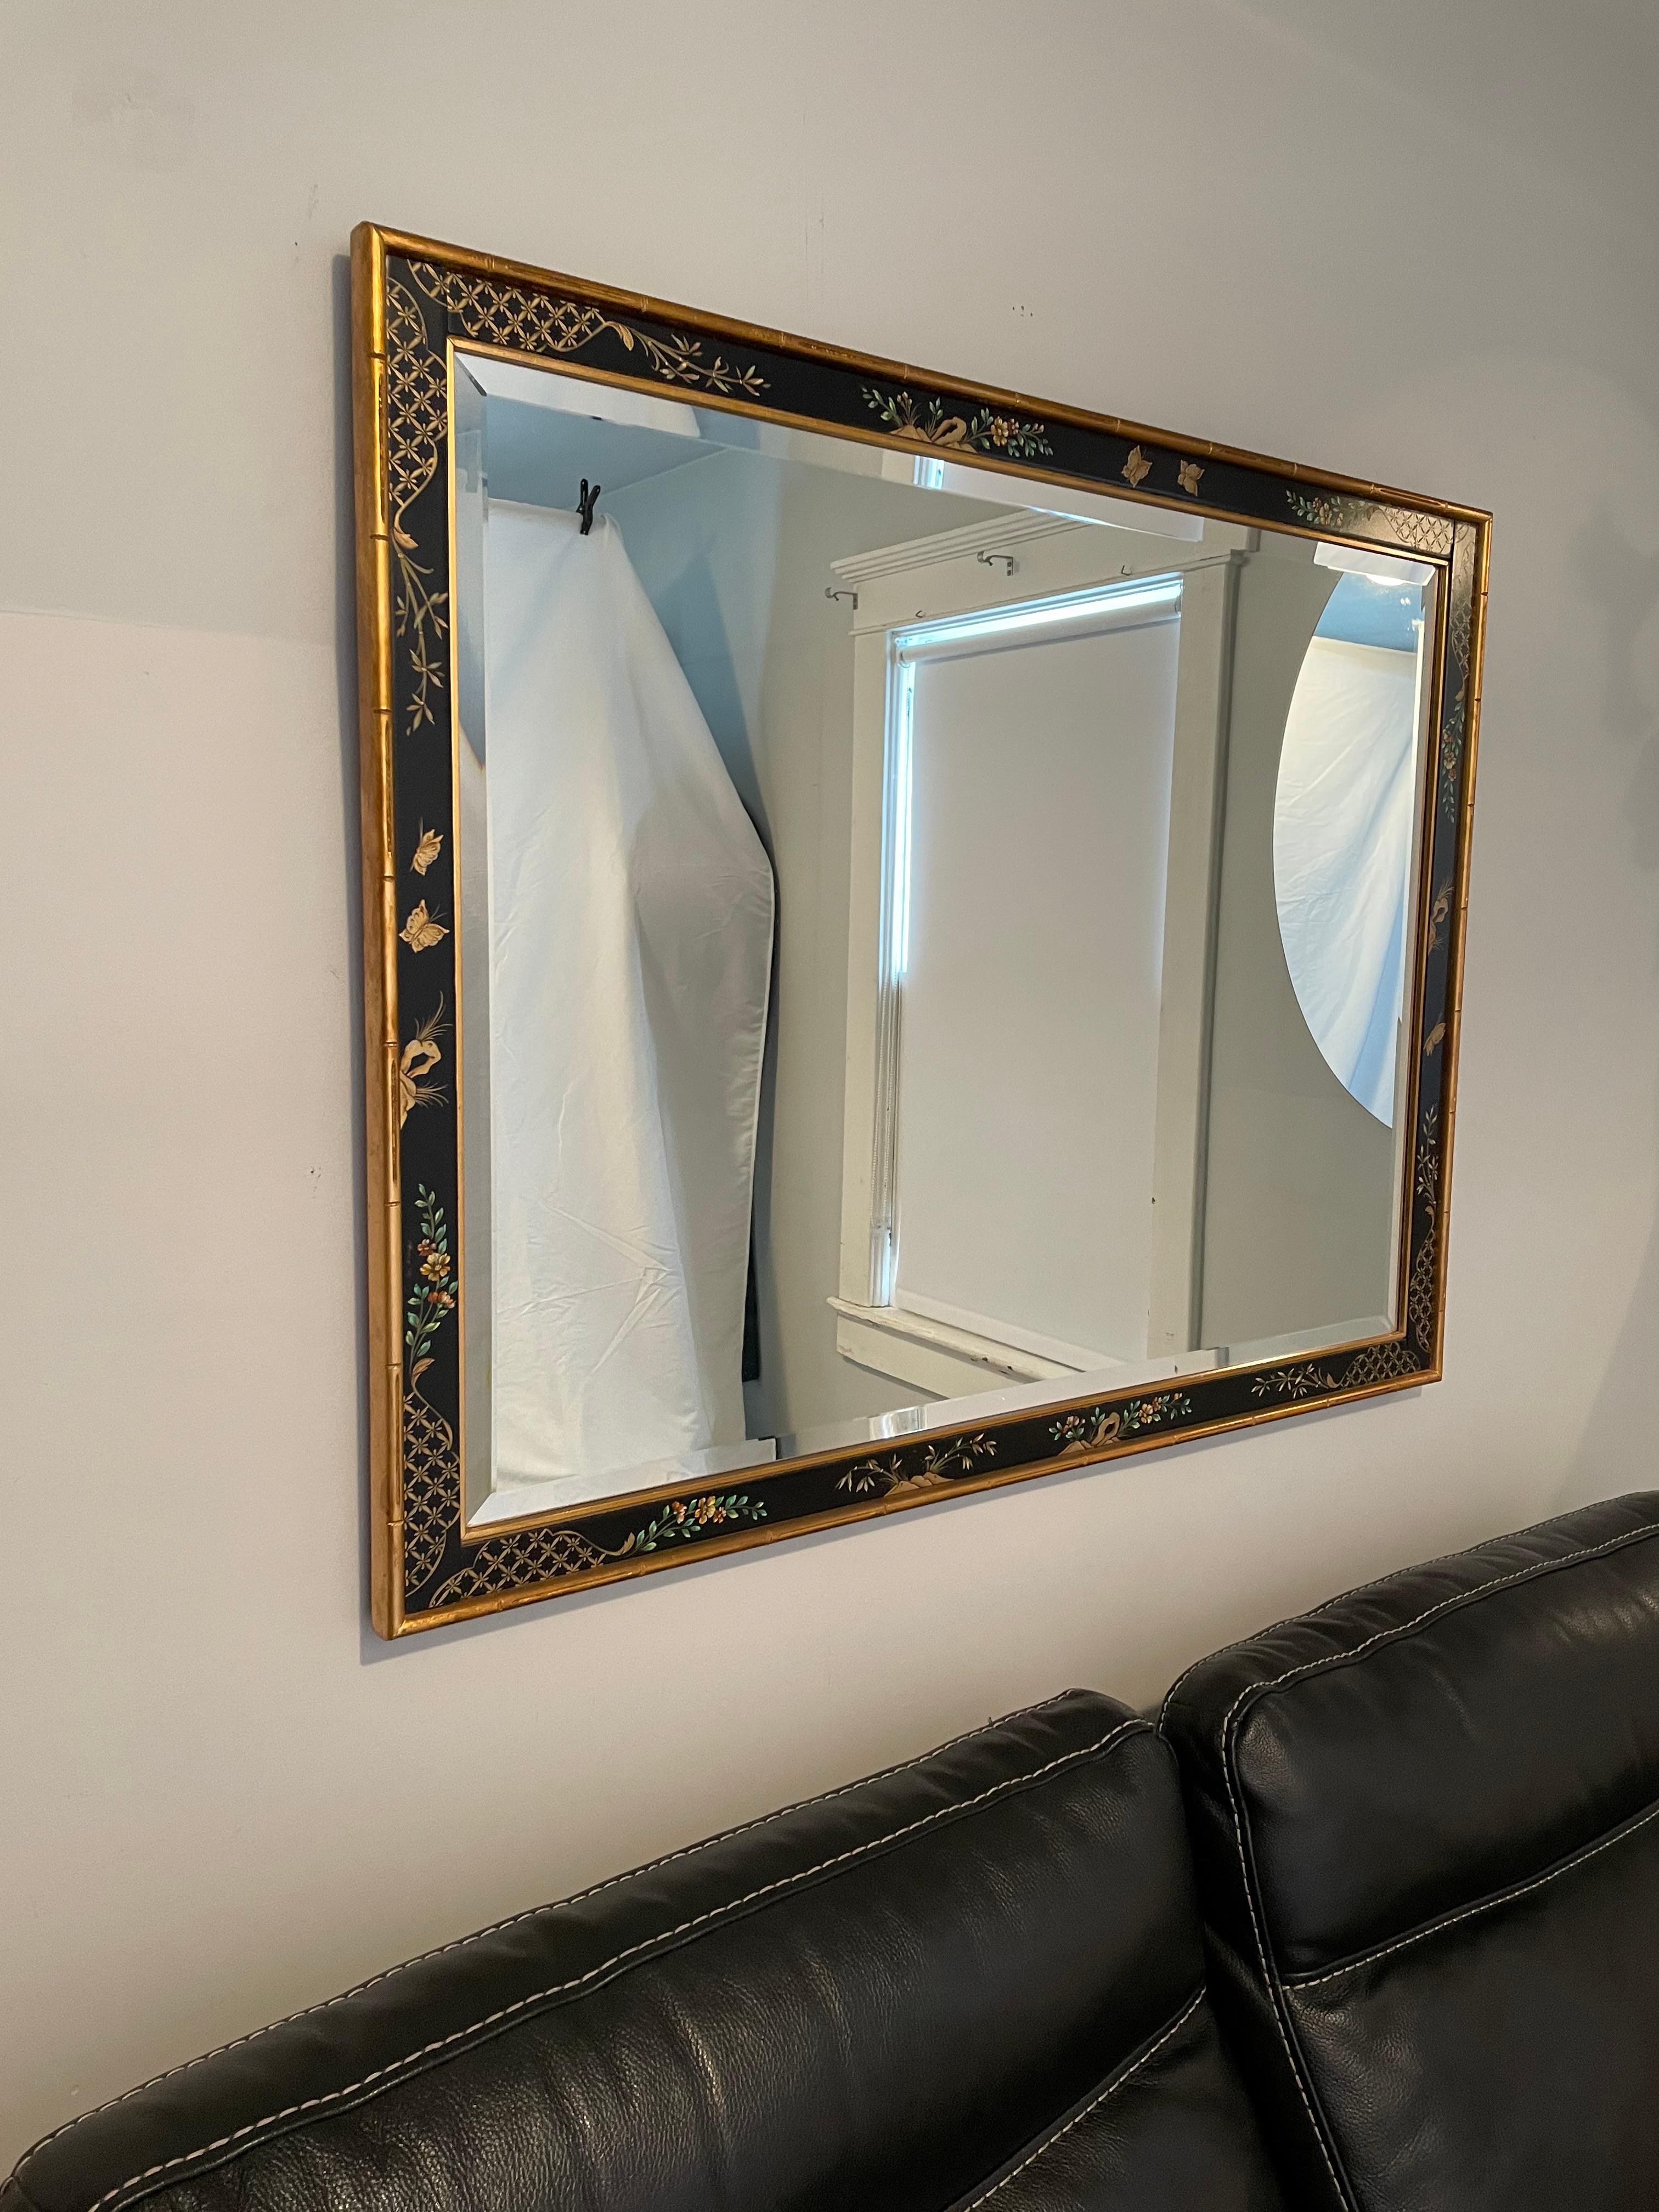 Beautiful Classic Chinoiserie La Barge hand painted mirror with gilt faux bamboo frame. Timeless.
Curbside to NYC/Philly $350.